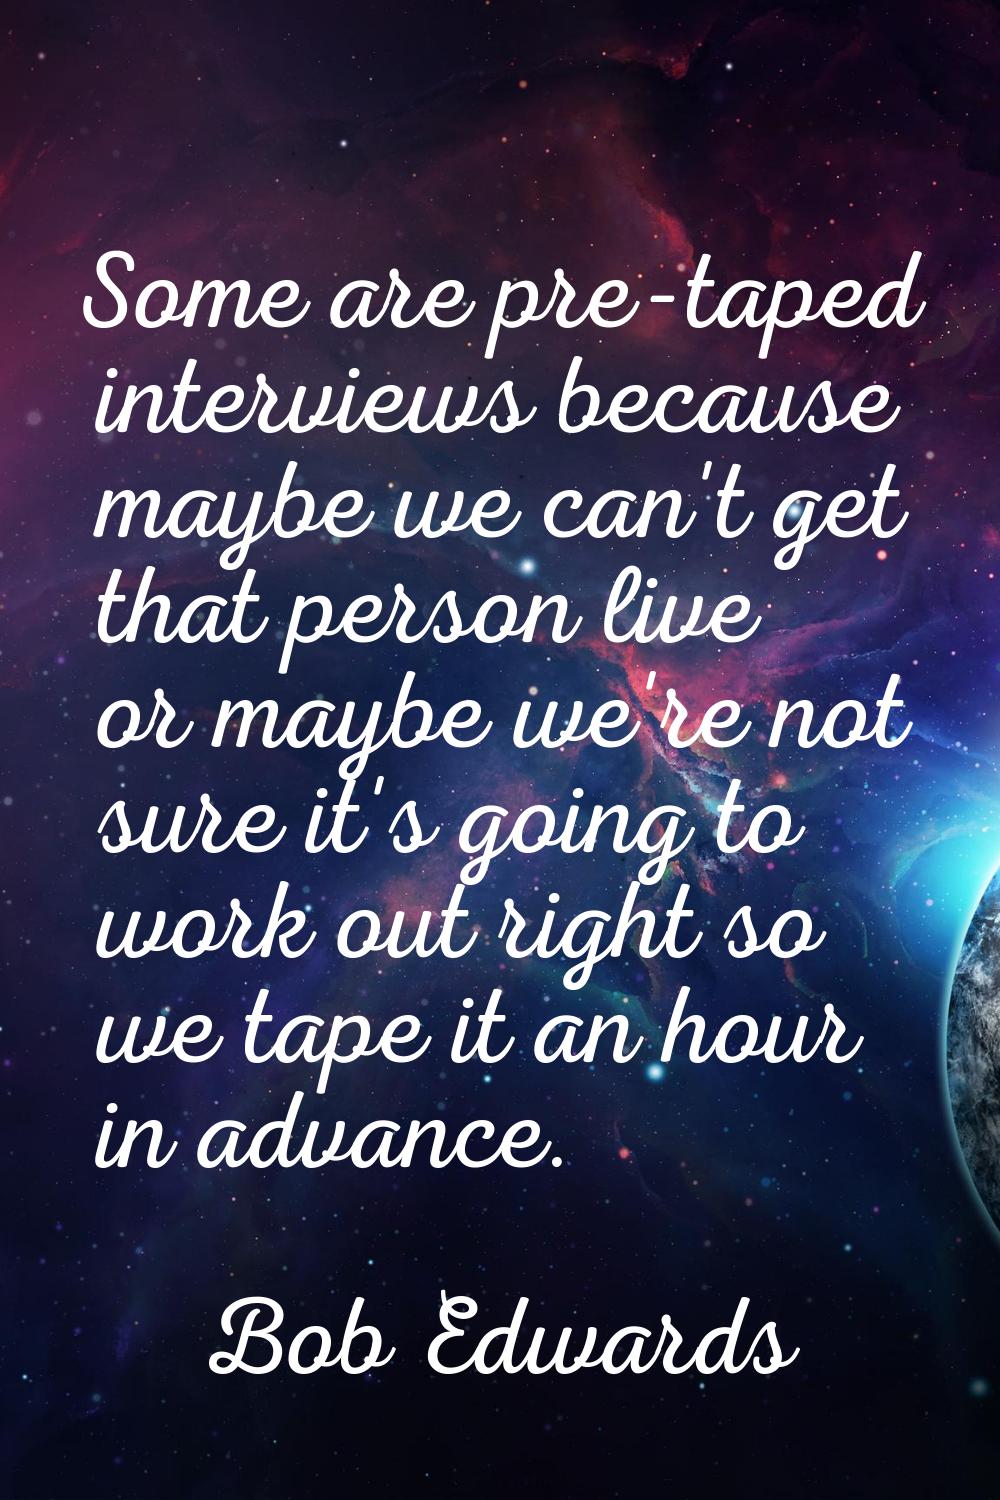 Some are pre-taped interviews because maybe we can't get that person live or maybe we're not sure i